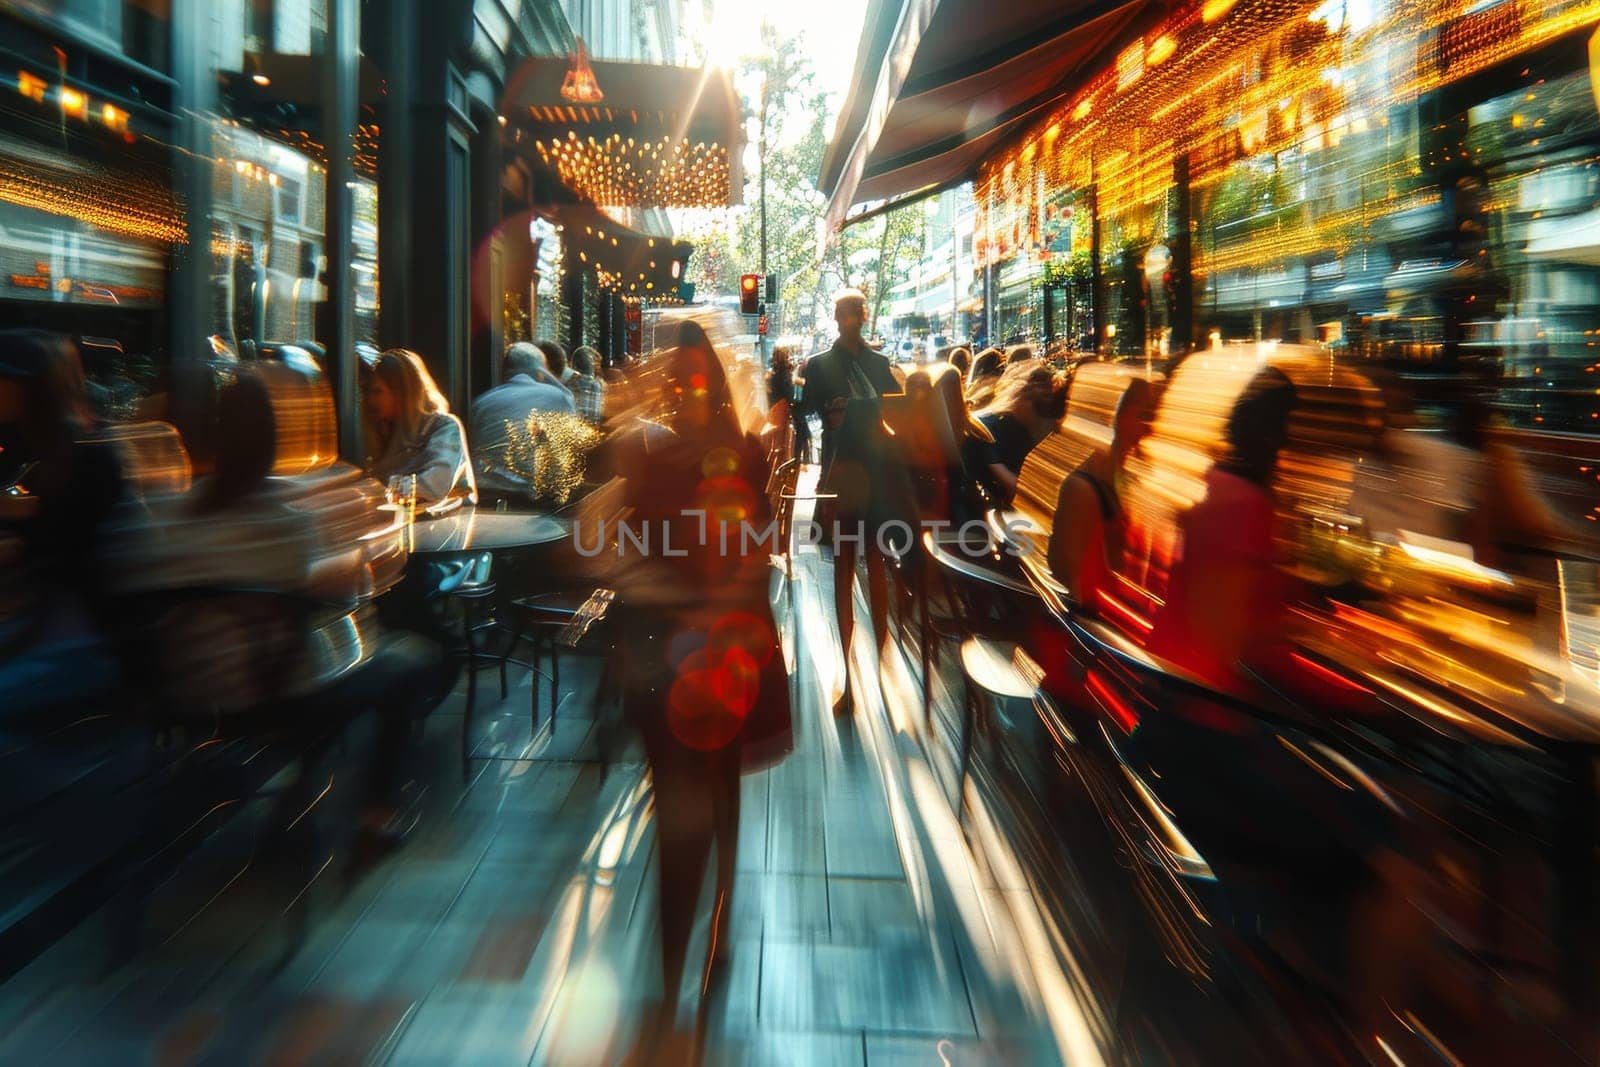 A blurry image of a busy city street with people walking and sitting at tables. Scene is lively and bustling, with a sense of movement and energy